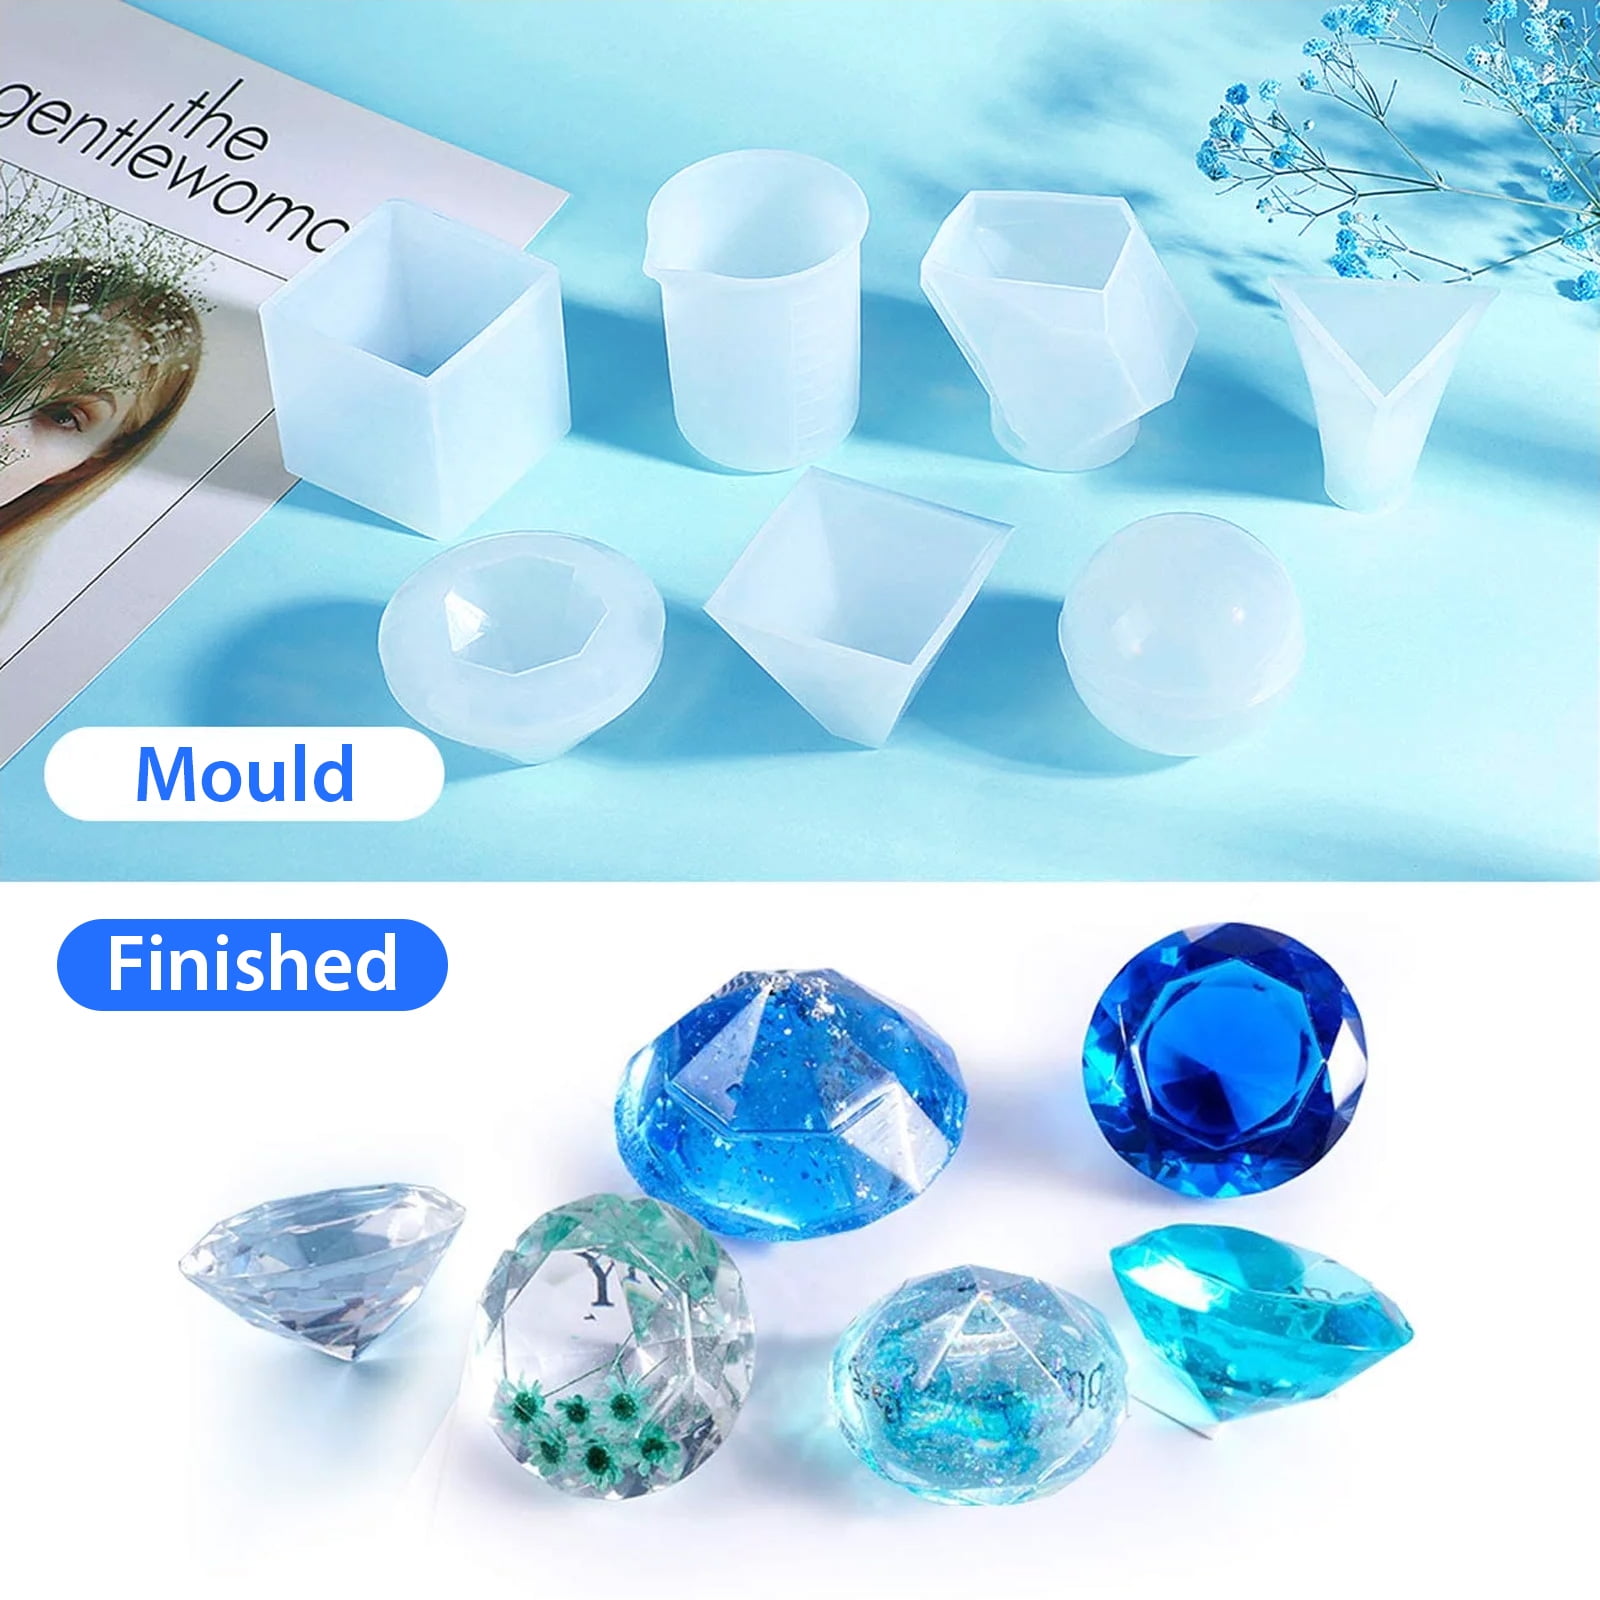  HyzaPhix Clear Silicone Cube Molds, Large Deep Square Epoxy  Resin Mold Cube Silicone Casting Moulds with Wooden Support for DIY Art  Resin Candle Soap Making, Flowers Preservation,Home Decor : Arts, Crafts